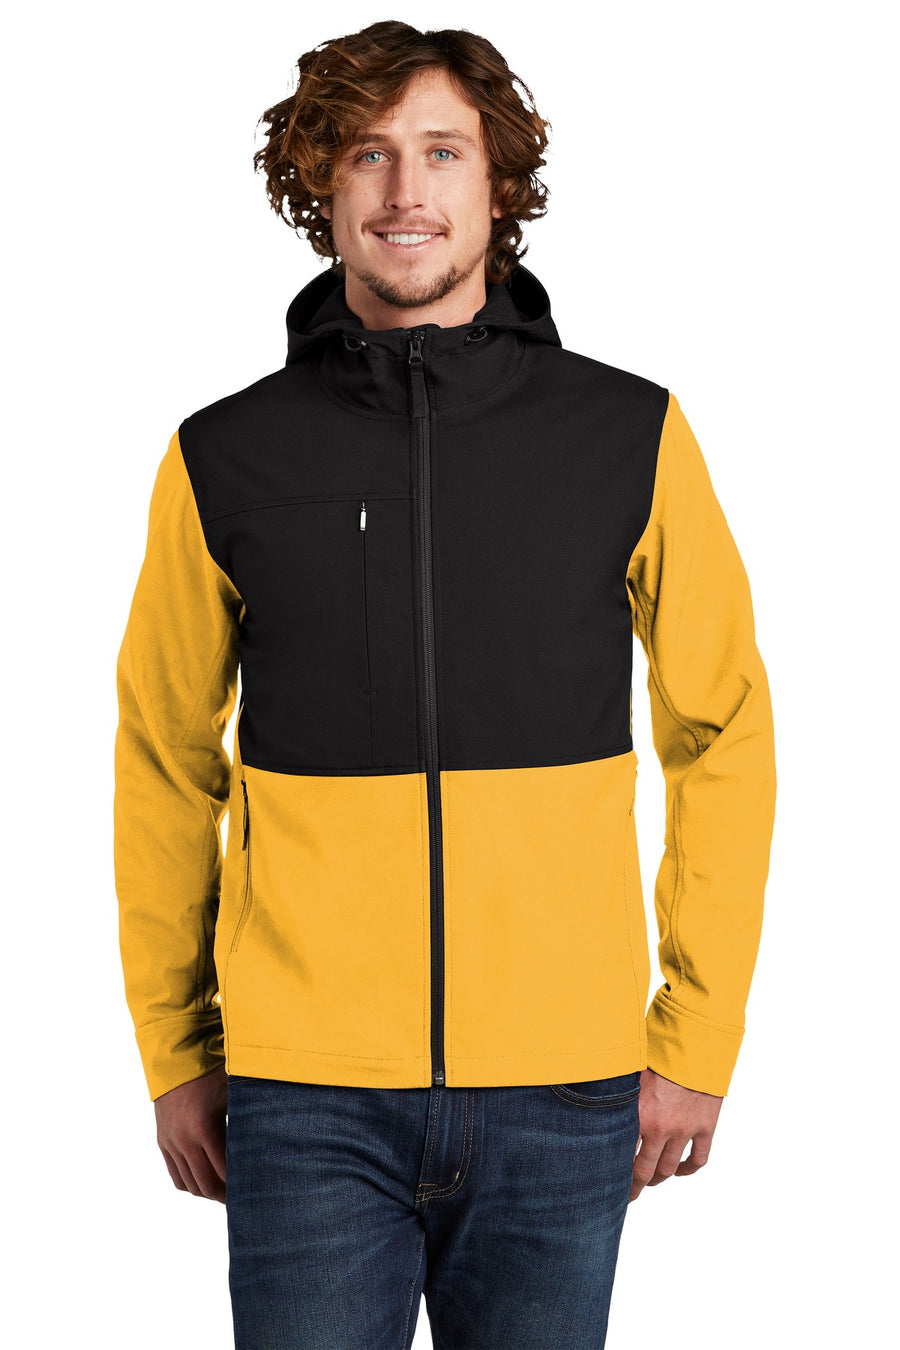 The North Face Castle Rock Hooded Soft Shell Jacket.